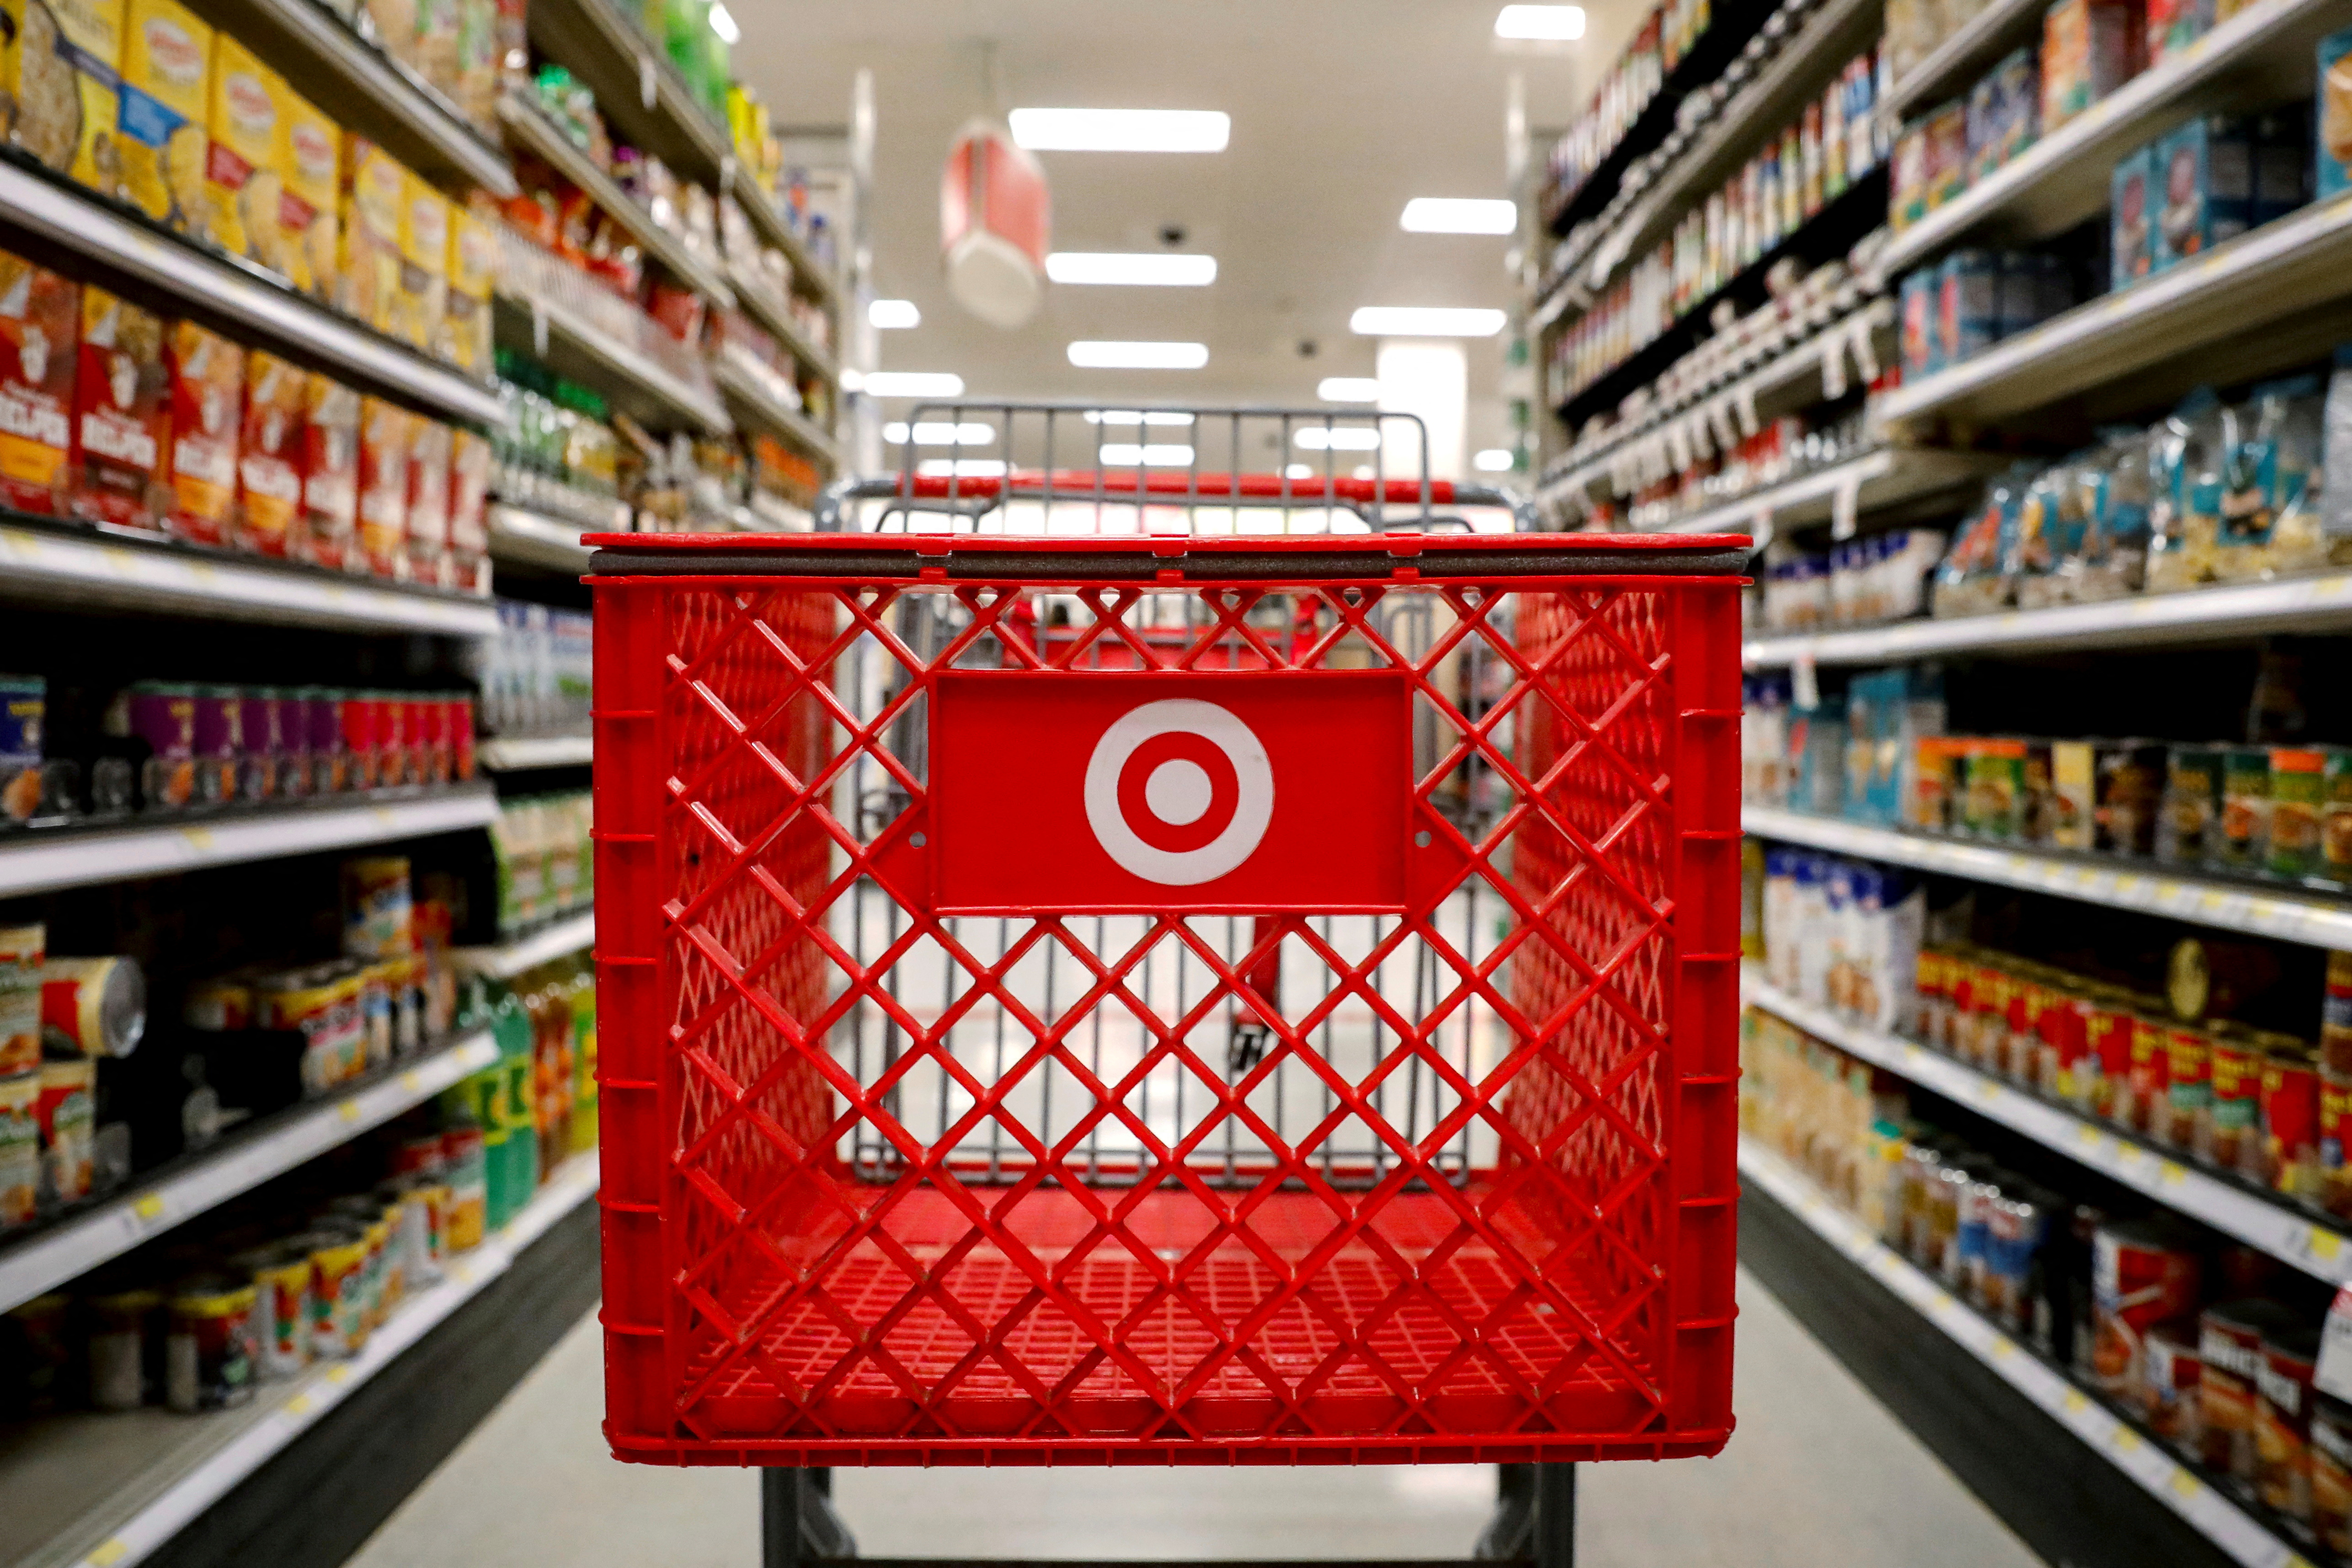 Target warns of more margin squeeze as excess inventory weighs